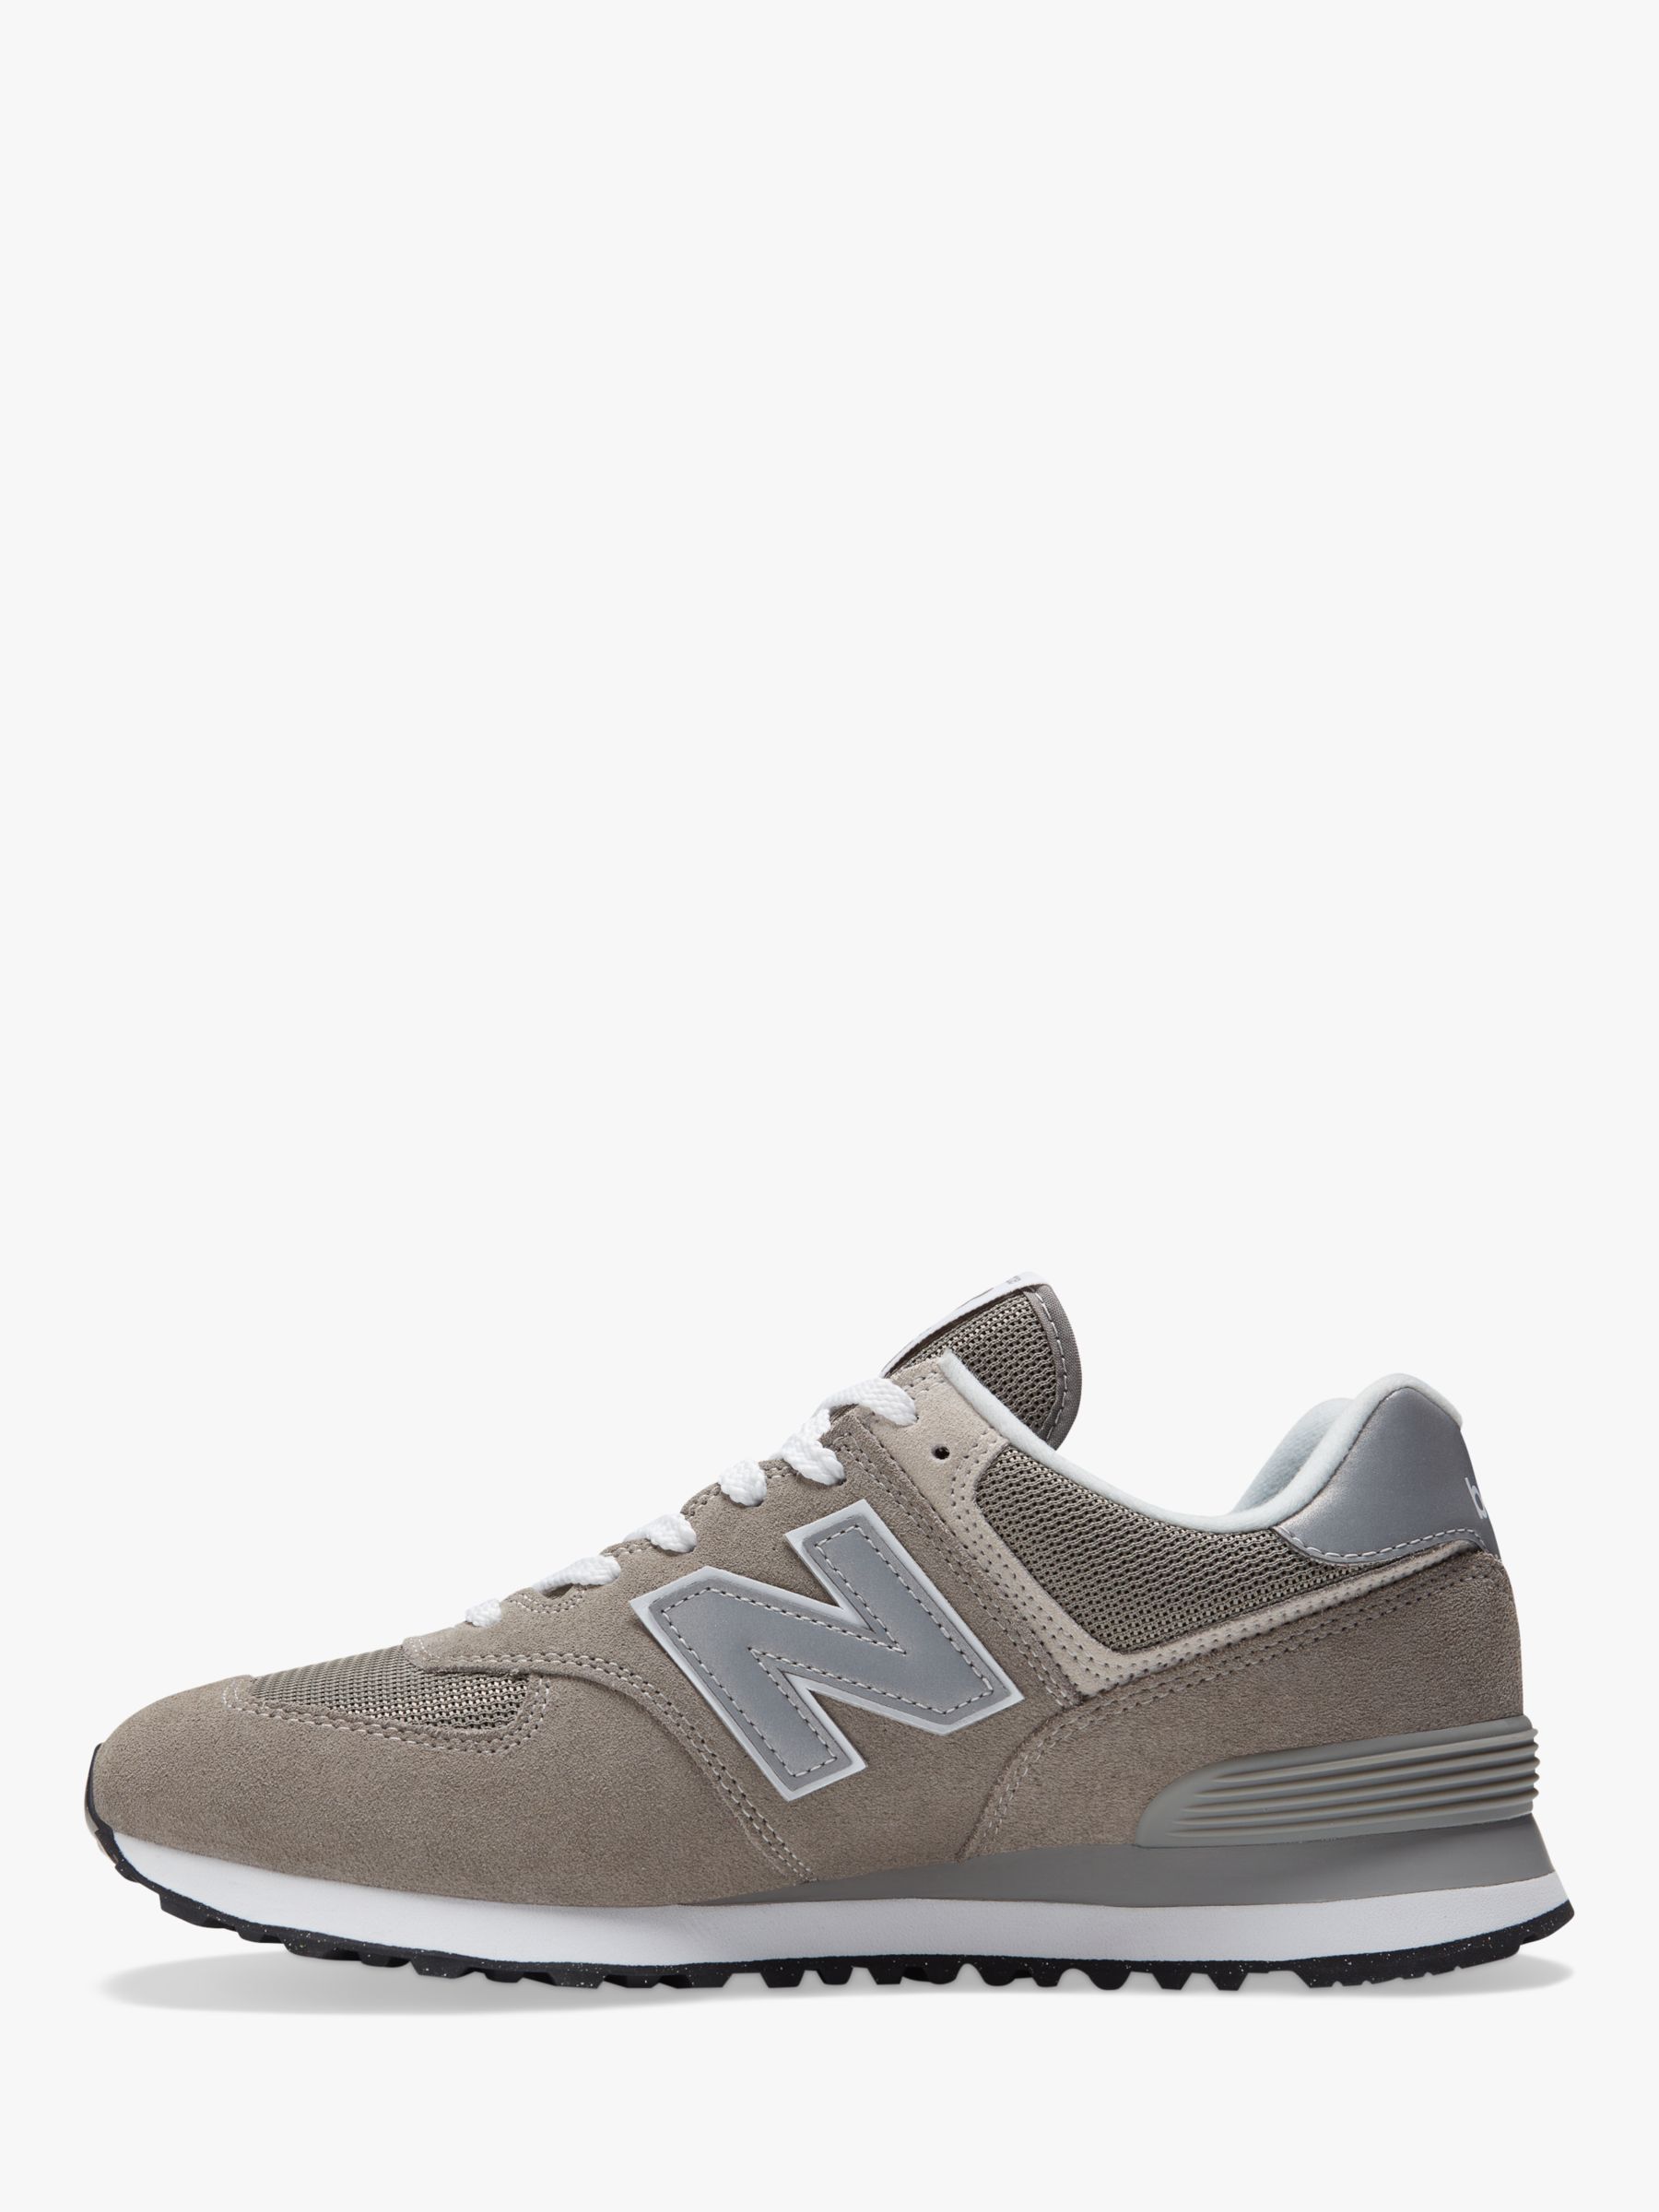 New Balance 574 Suede Trainers, Grey/White at John Lewis & Partners